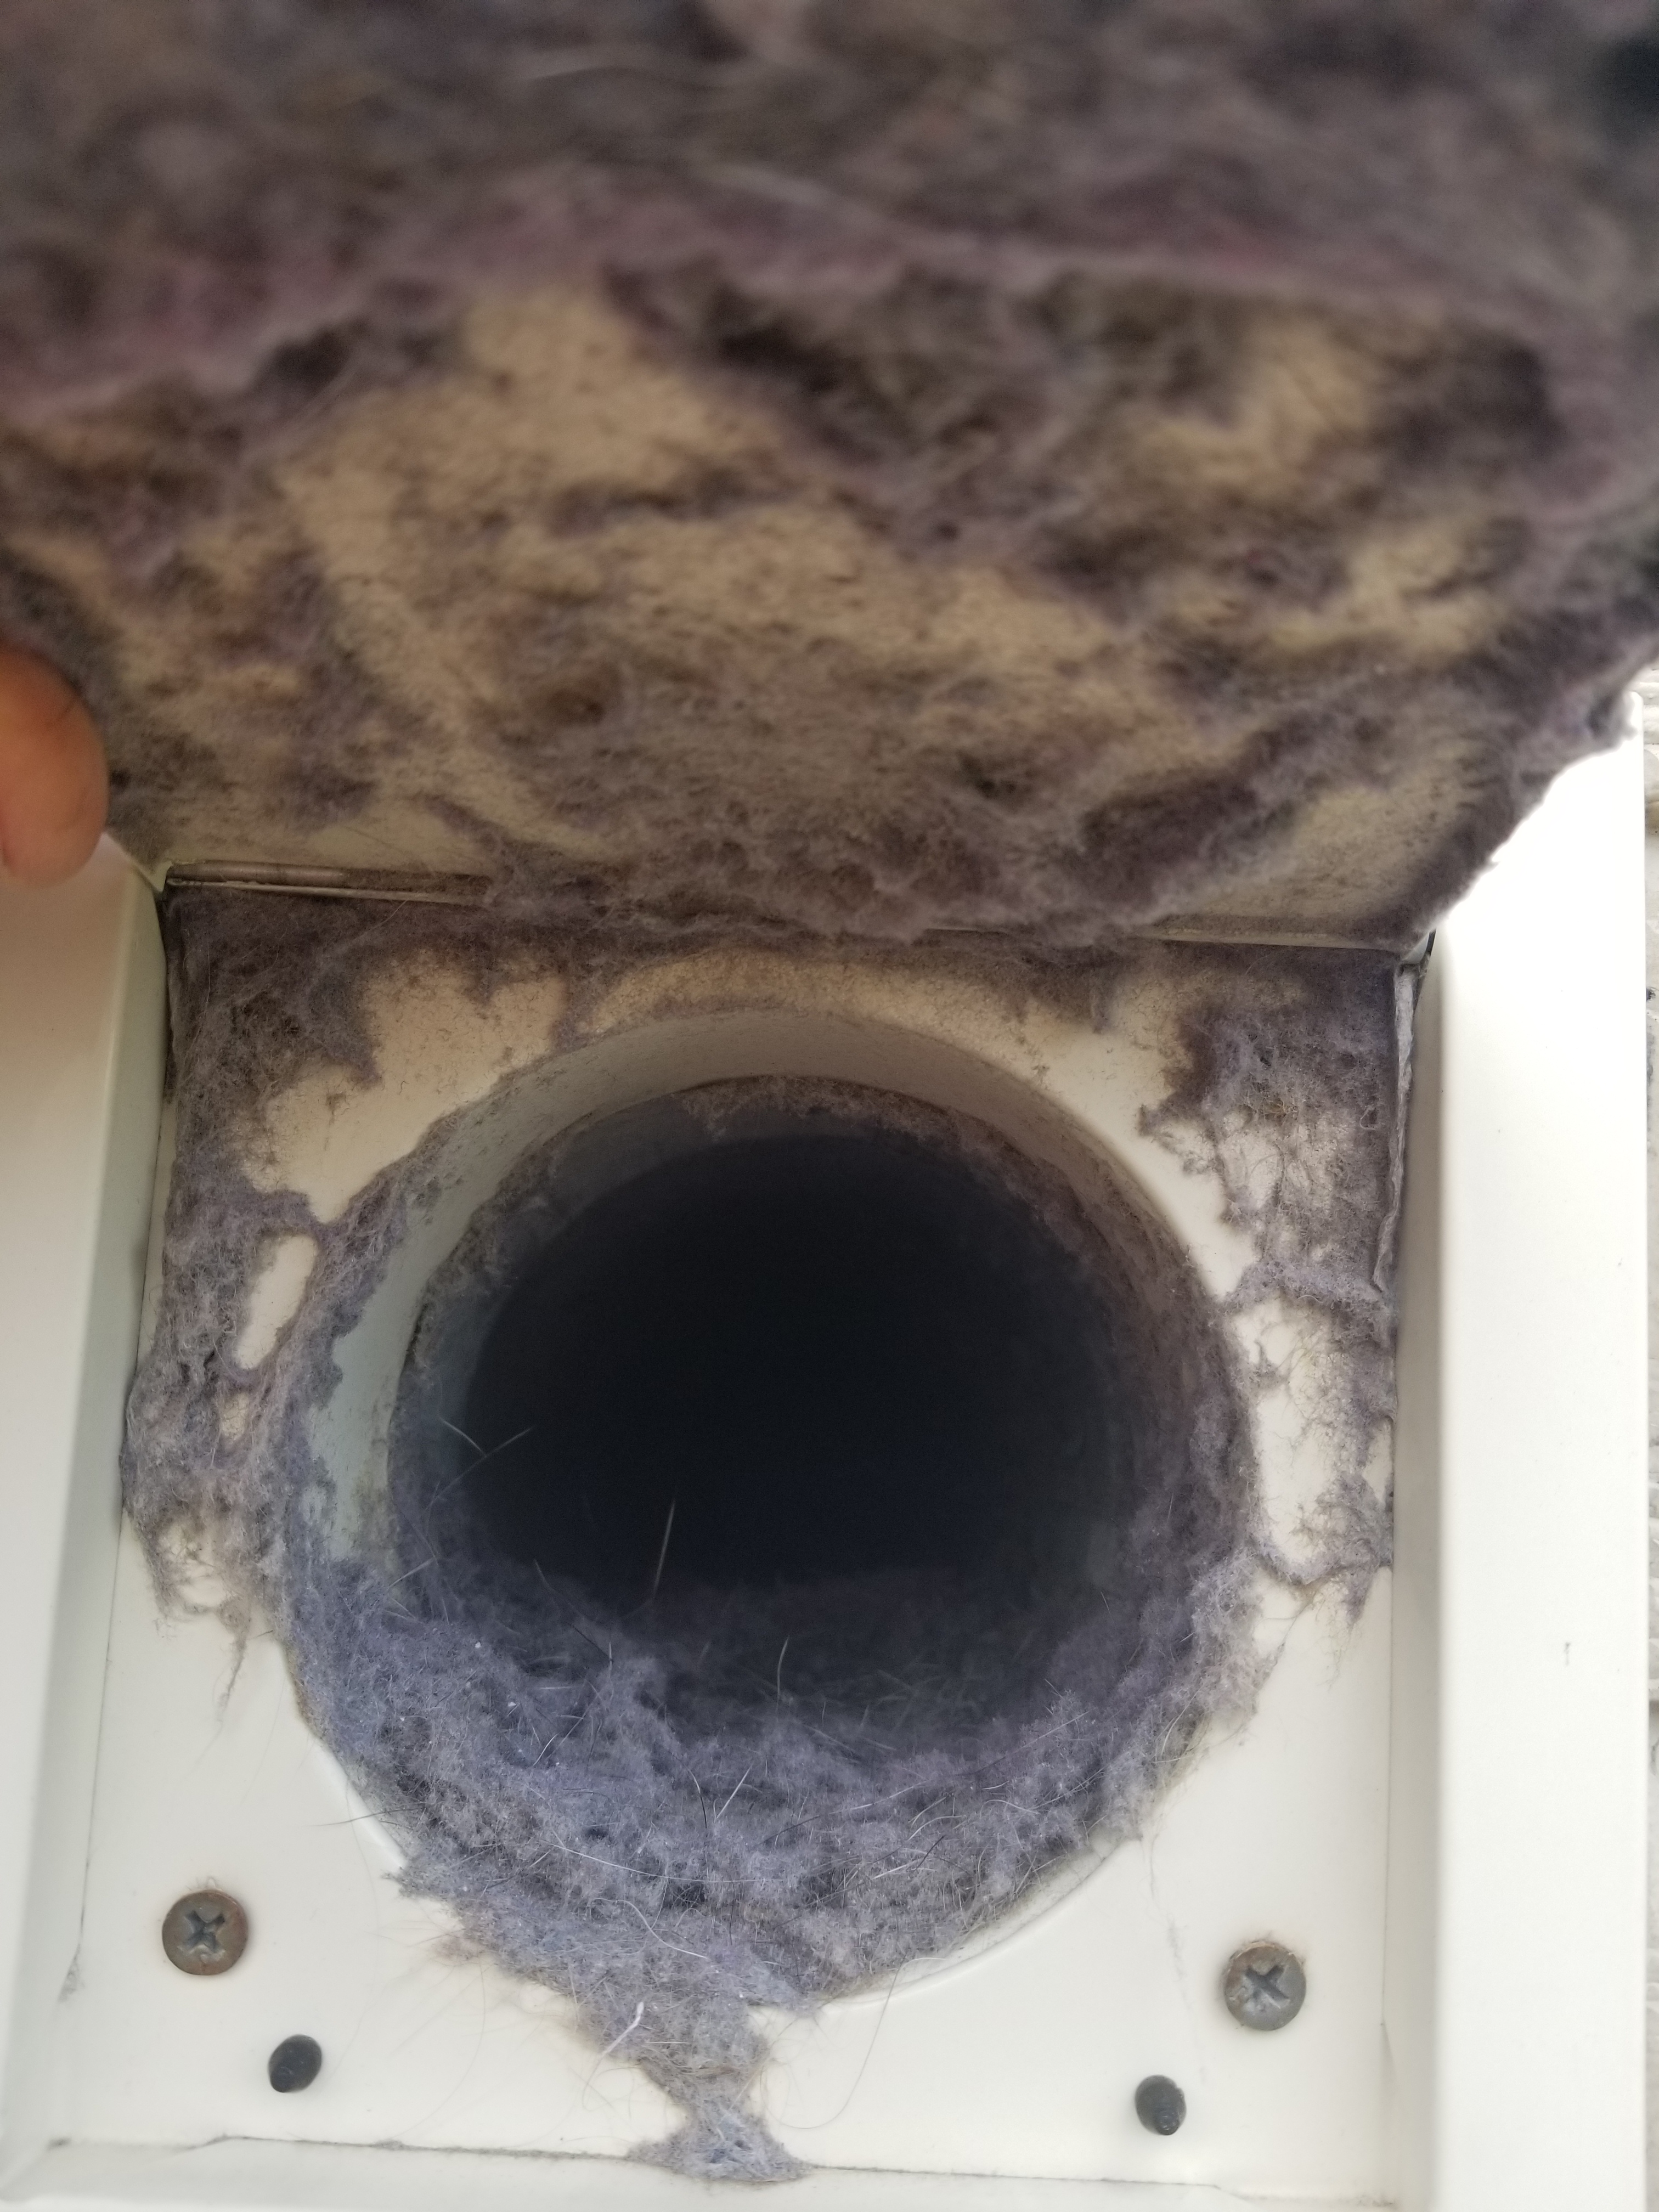 A photo before we cleaned the dryer vent